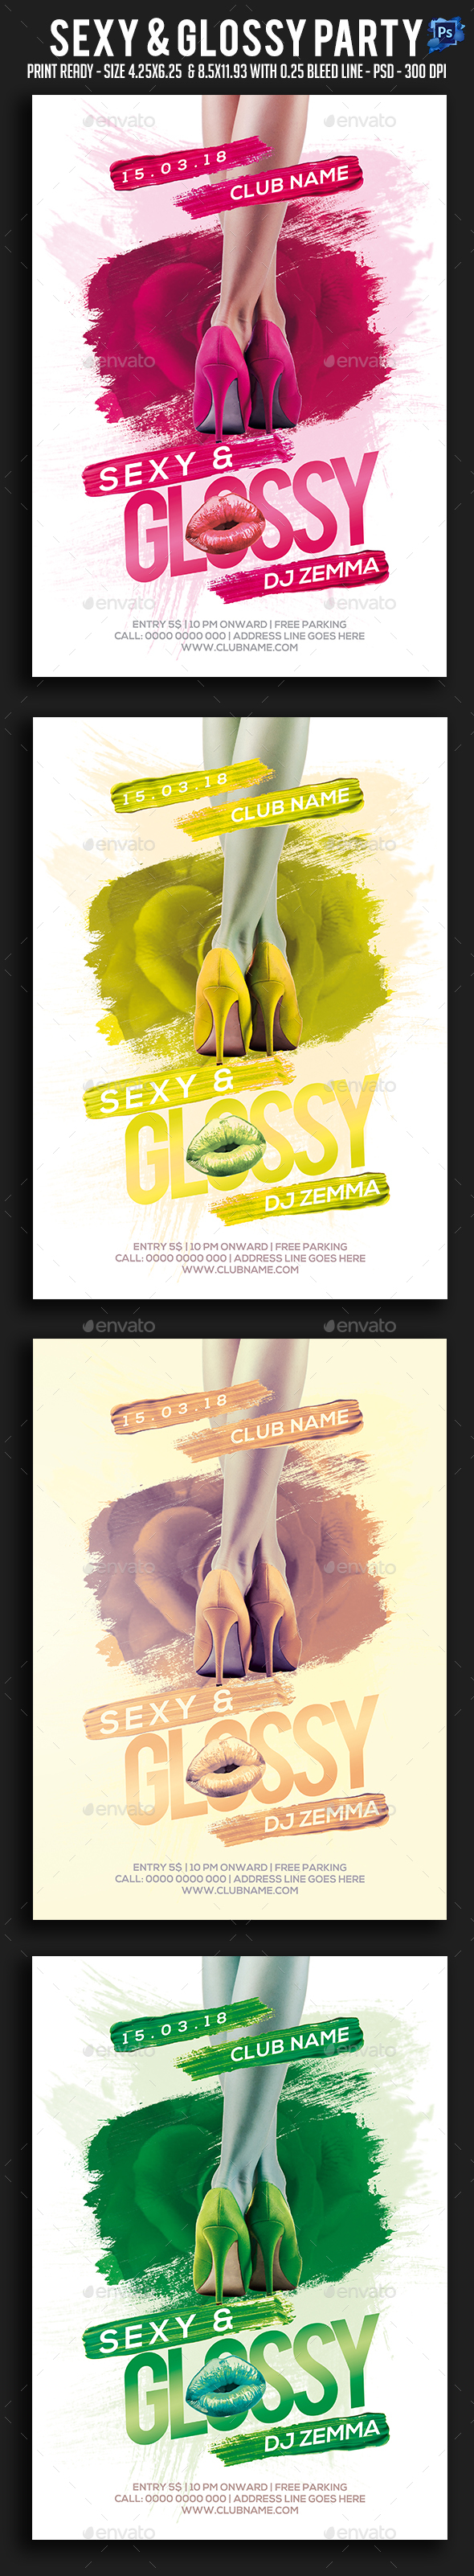 Sexy & Glossy Party Flyer